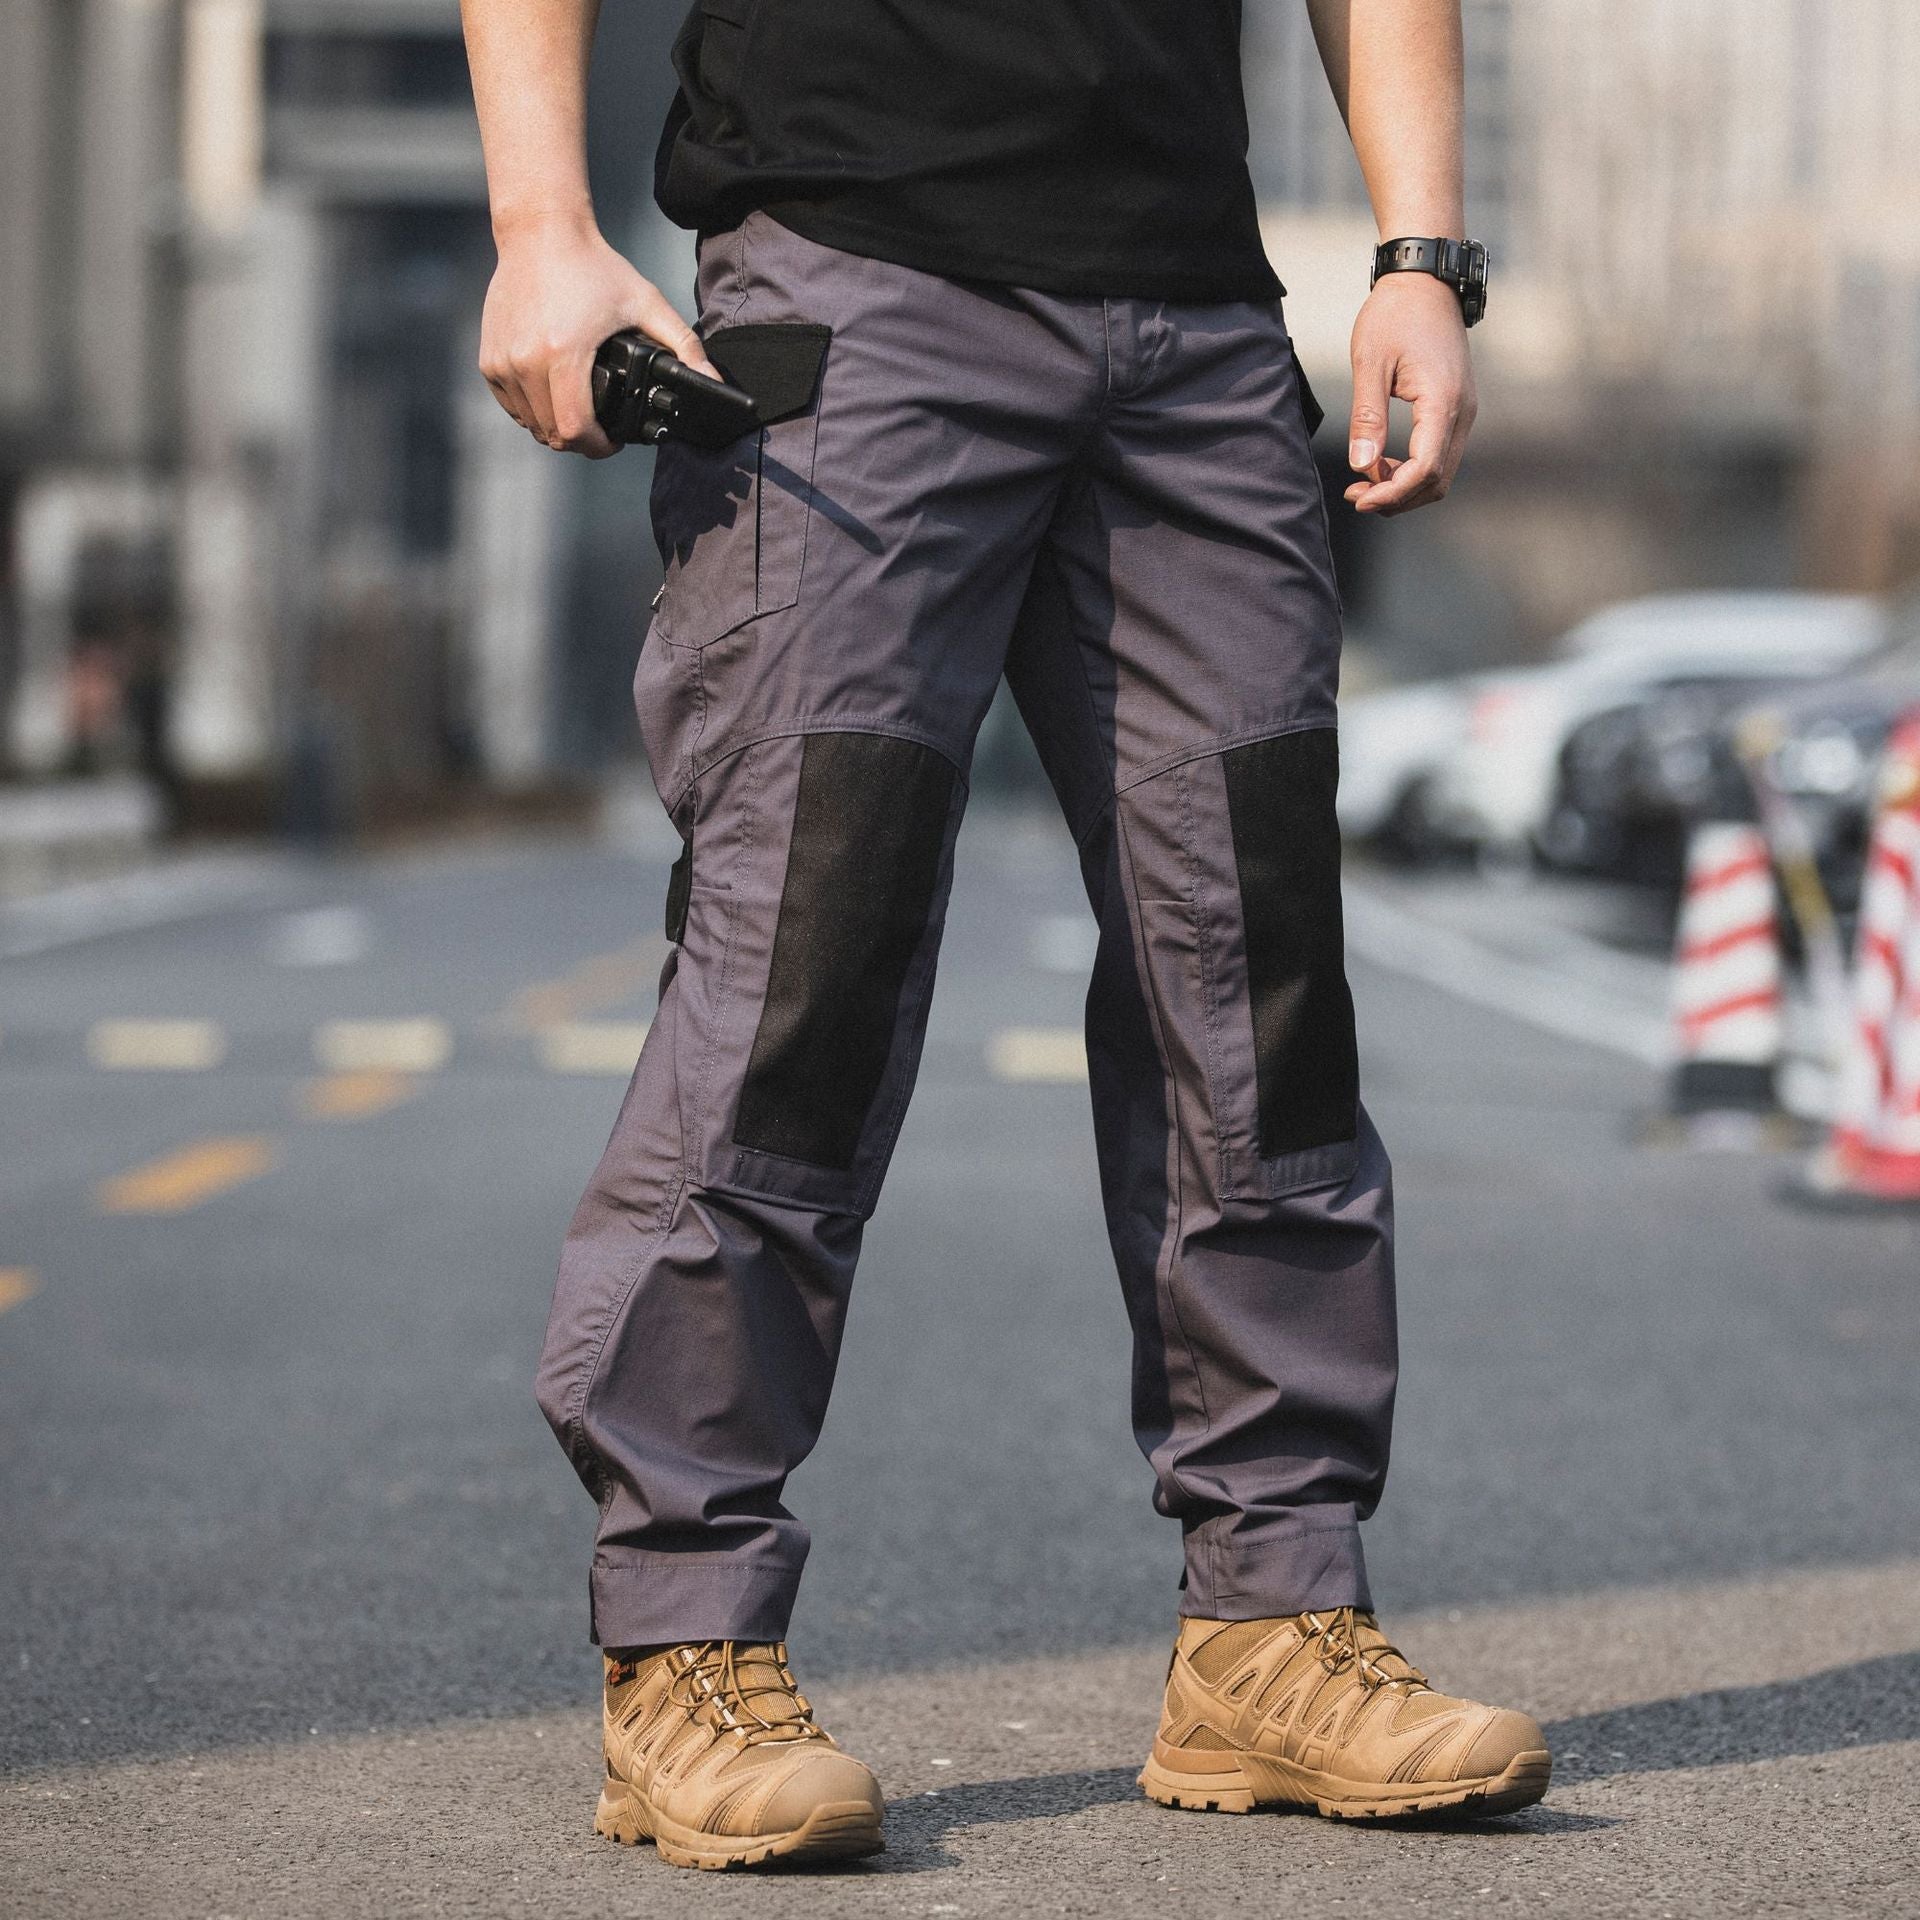 Men's American Cargo Pants Stretch Outdoor Multi-pocket Tactical Trousers |  eBay